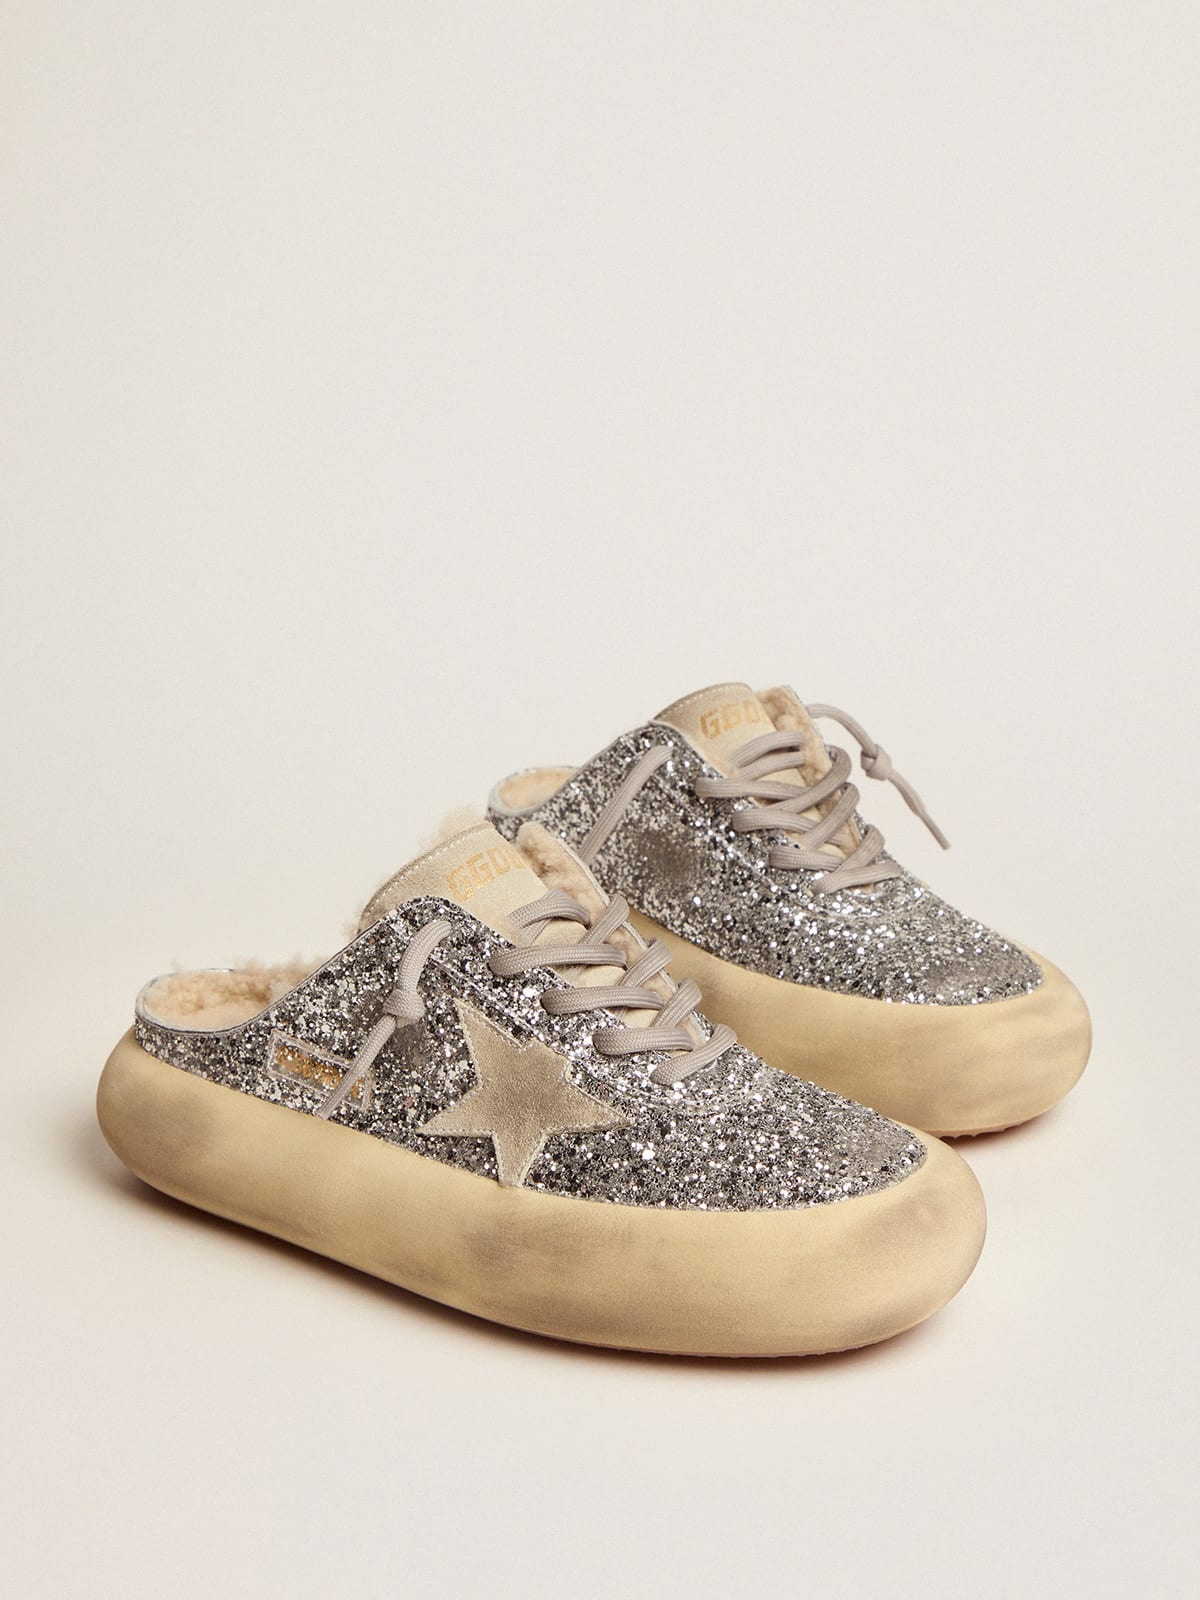 Space-Star Sabot shoes in silver glitter with shearling lining - 2